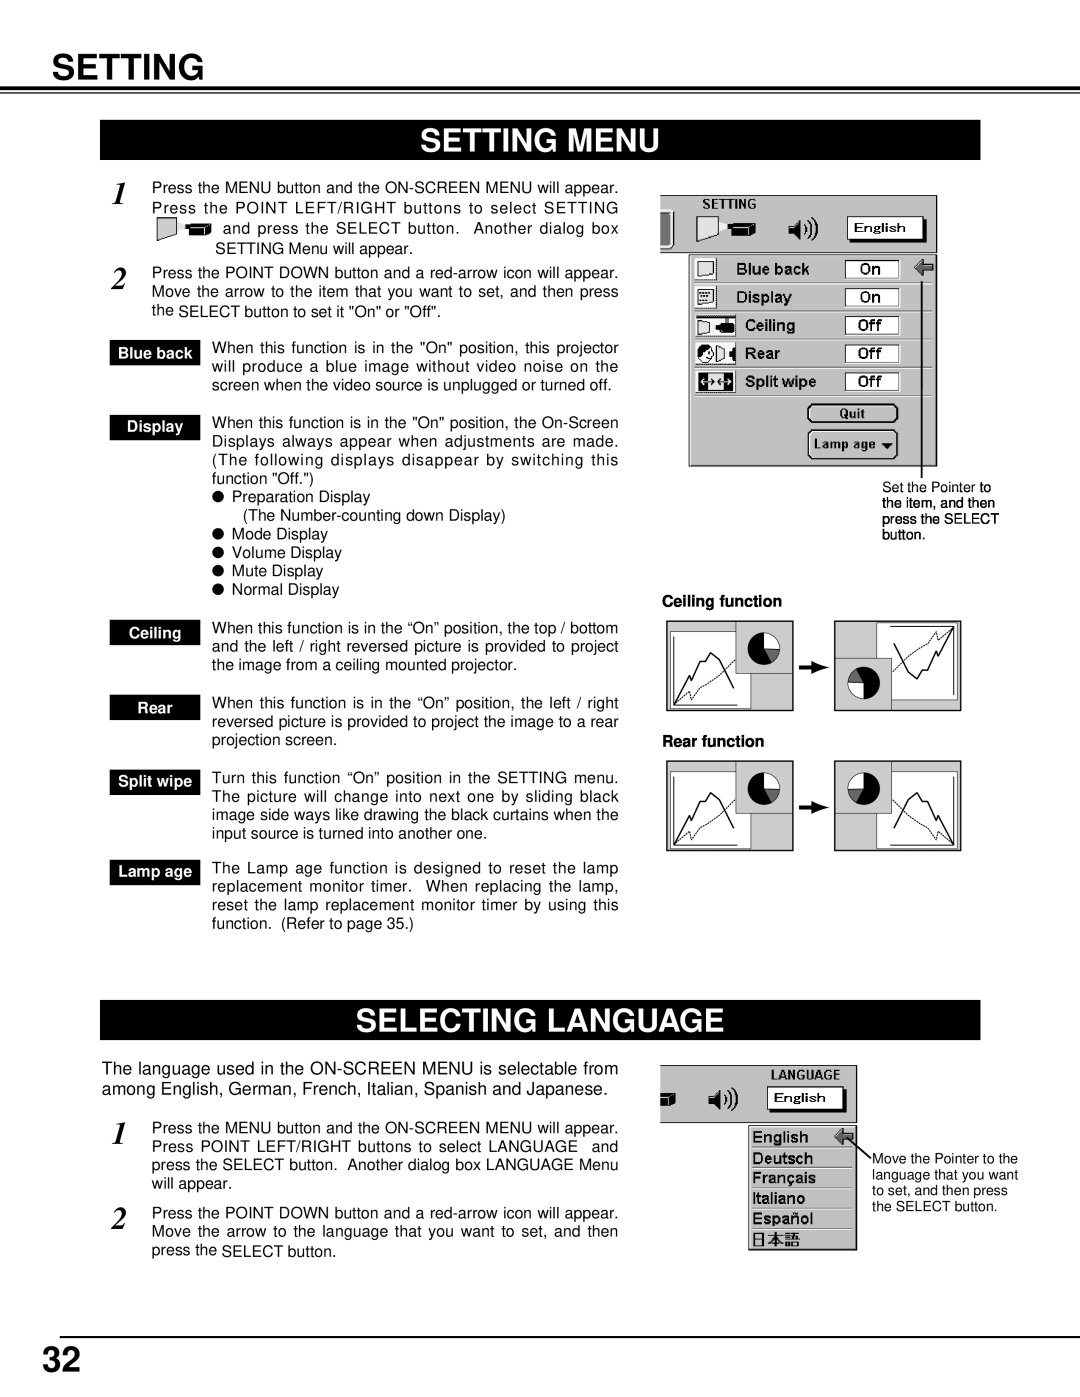 BOXLIGHT CP-14t manual Setting Menu, Selecting Language, Ceiling function Rear function 